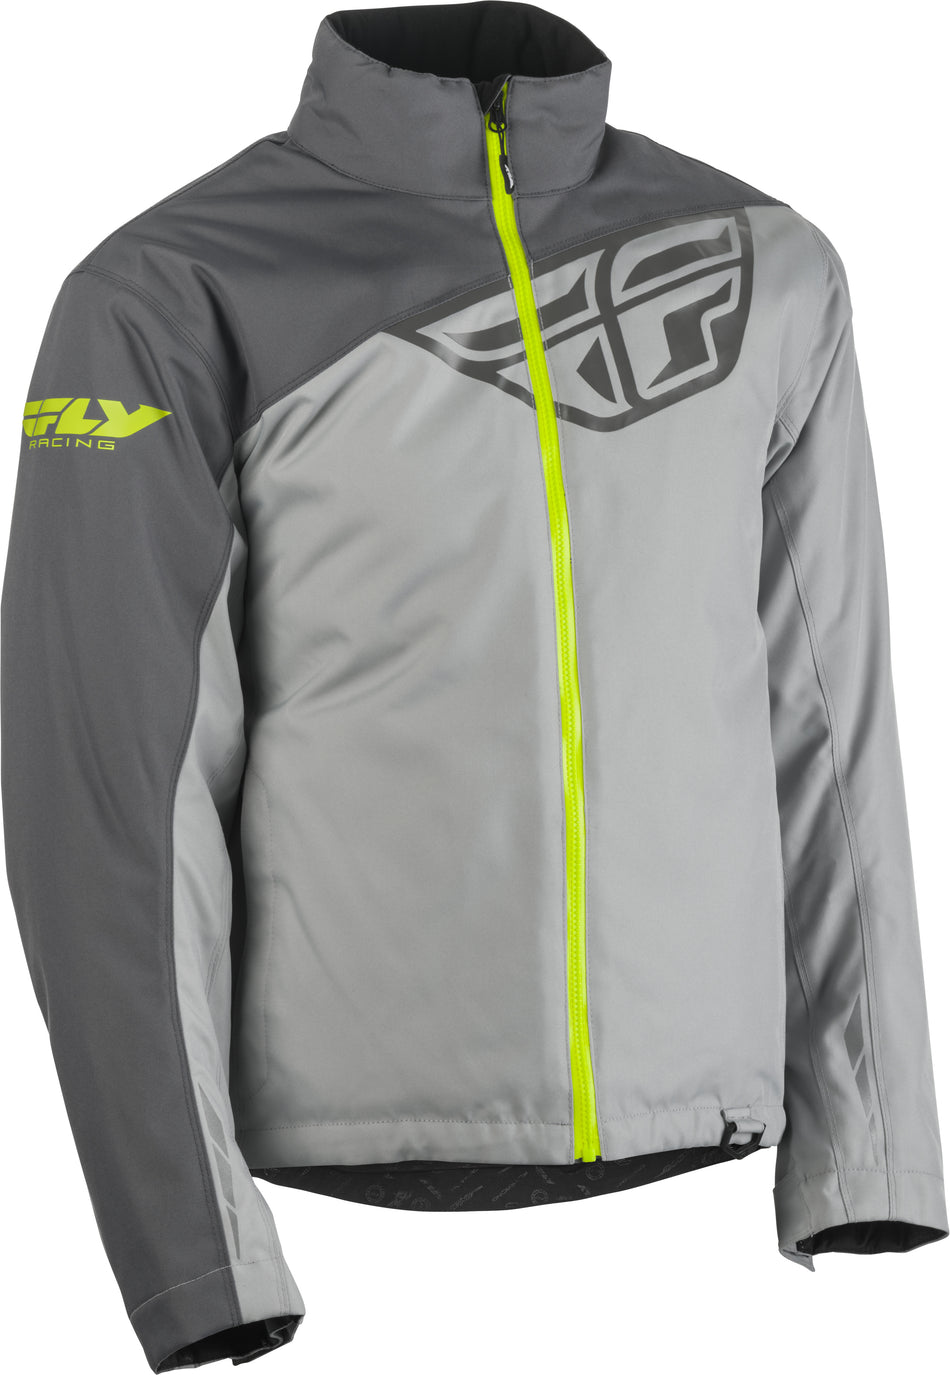 FLY RACING Fly Aurora Jacket Charcoal/Grey Sm 470-4121S